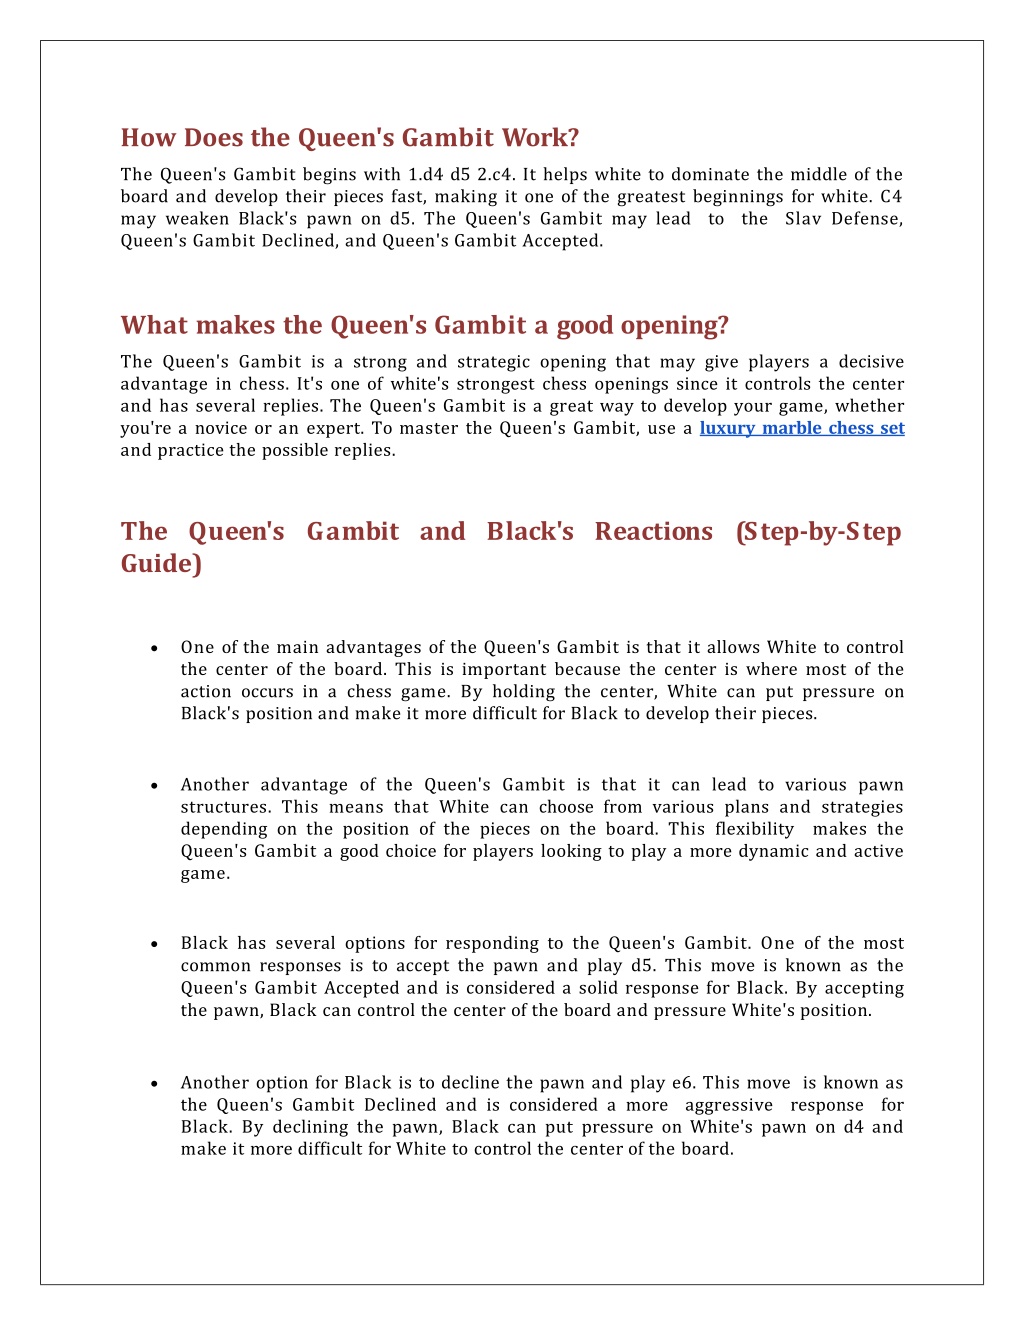 Queen's Gambit Opening (Variations, Move Orders, Purpose & Strategy) - PPQTY